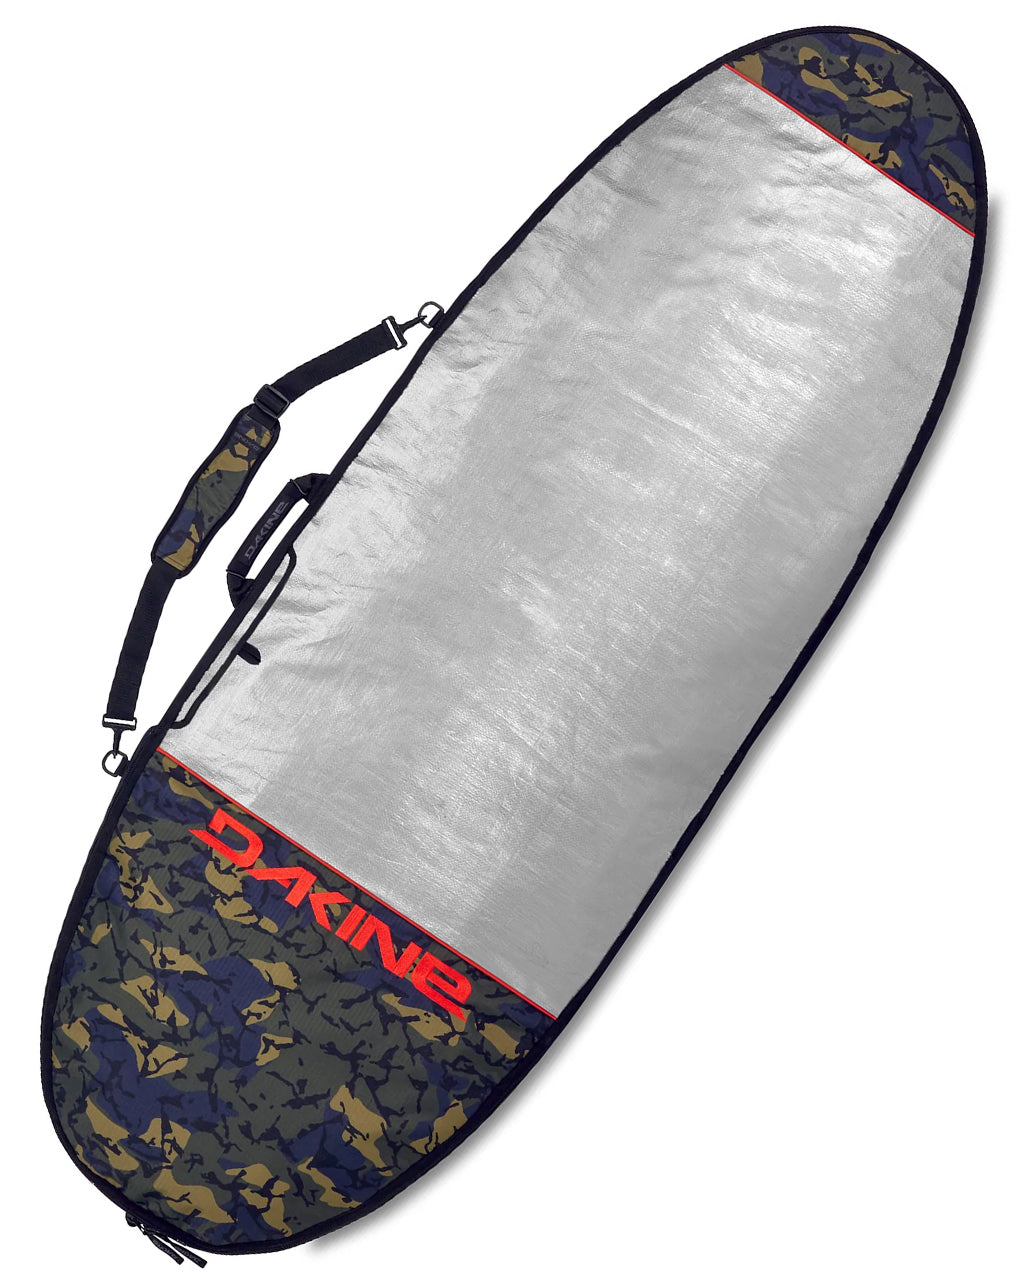 Creatures of Leisure Fish Travel DT 2.0 Surfboard Bag - Surf